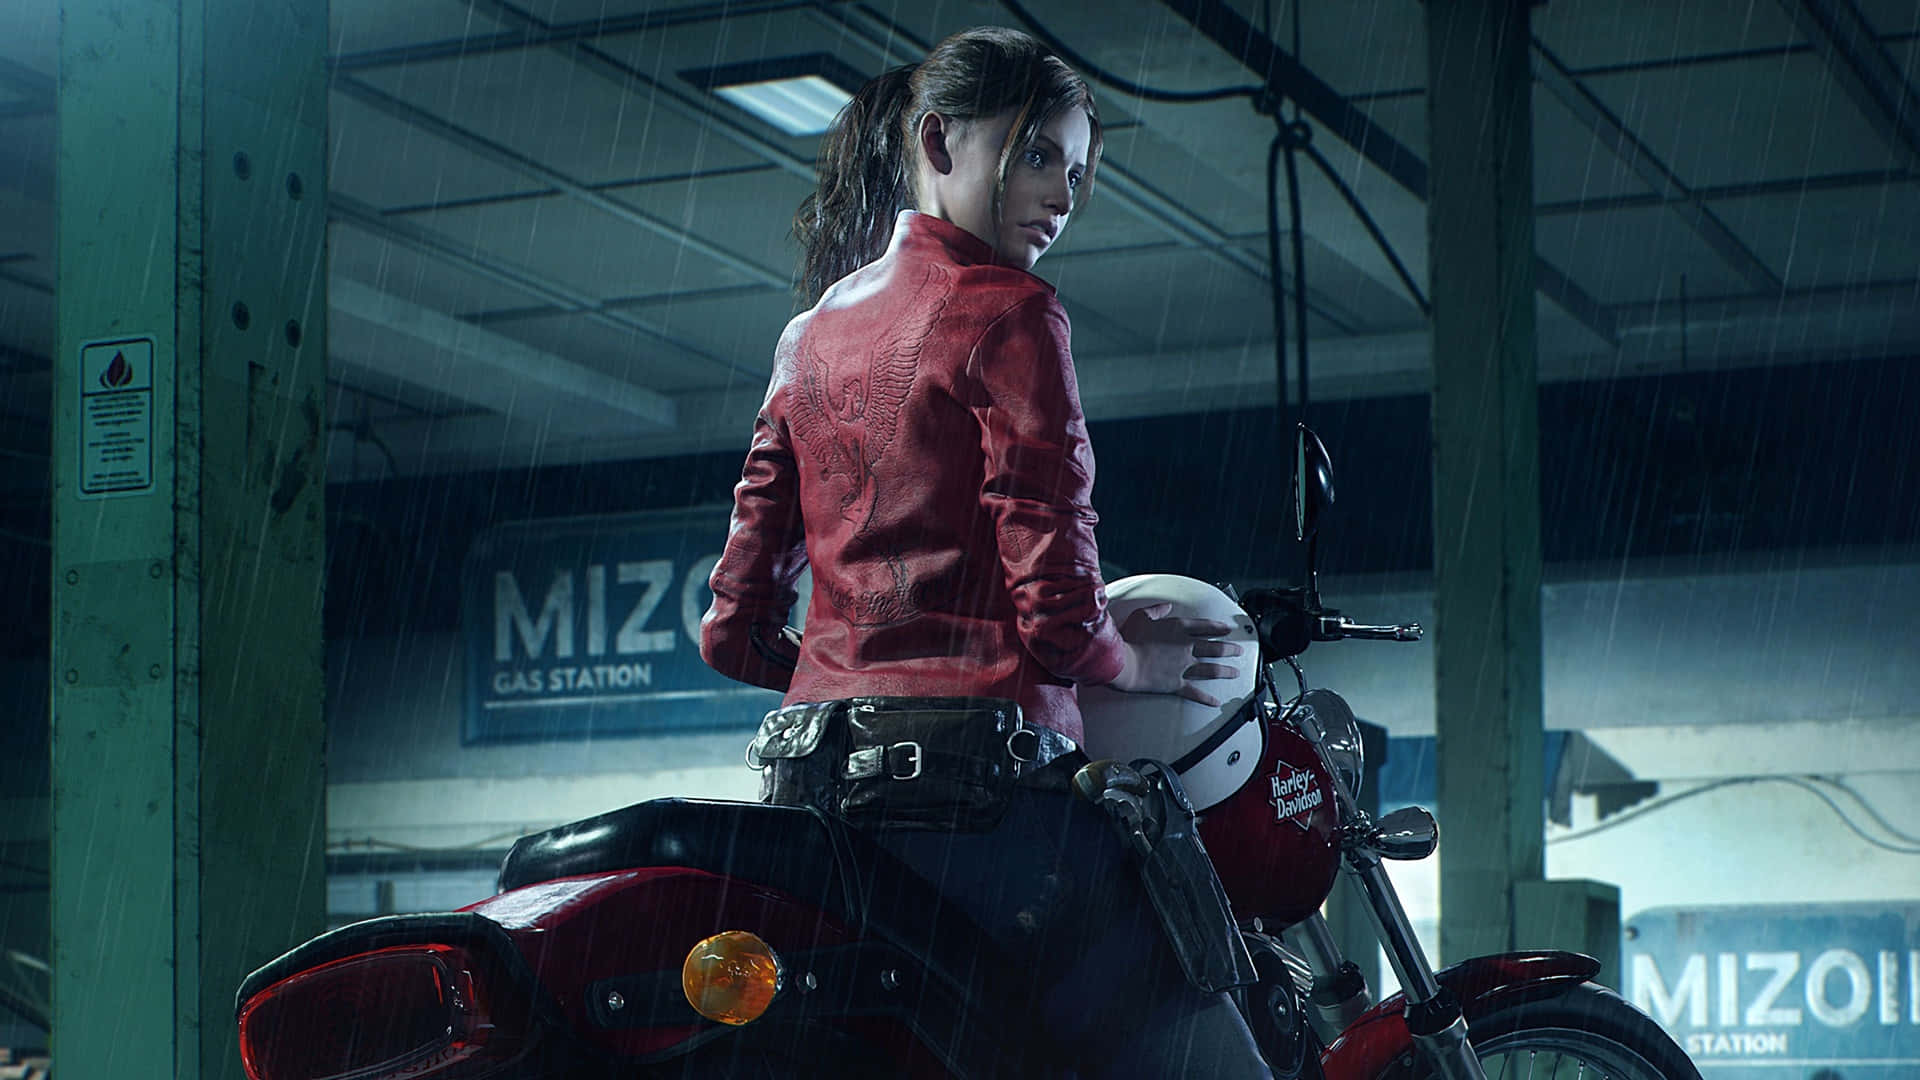 1920x1080 Resident Evil 2 Background Claire And Her Motorcycle Background